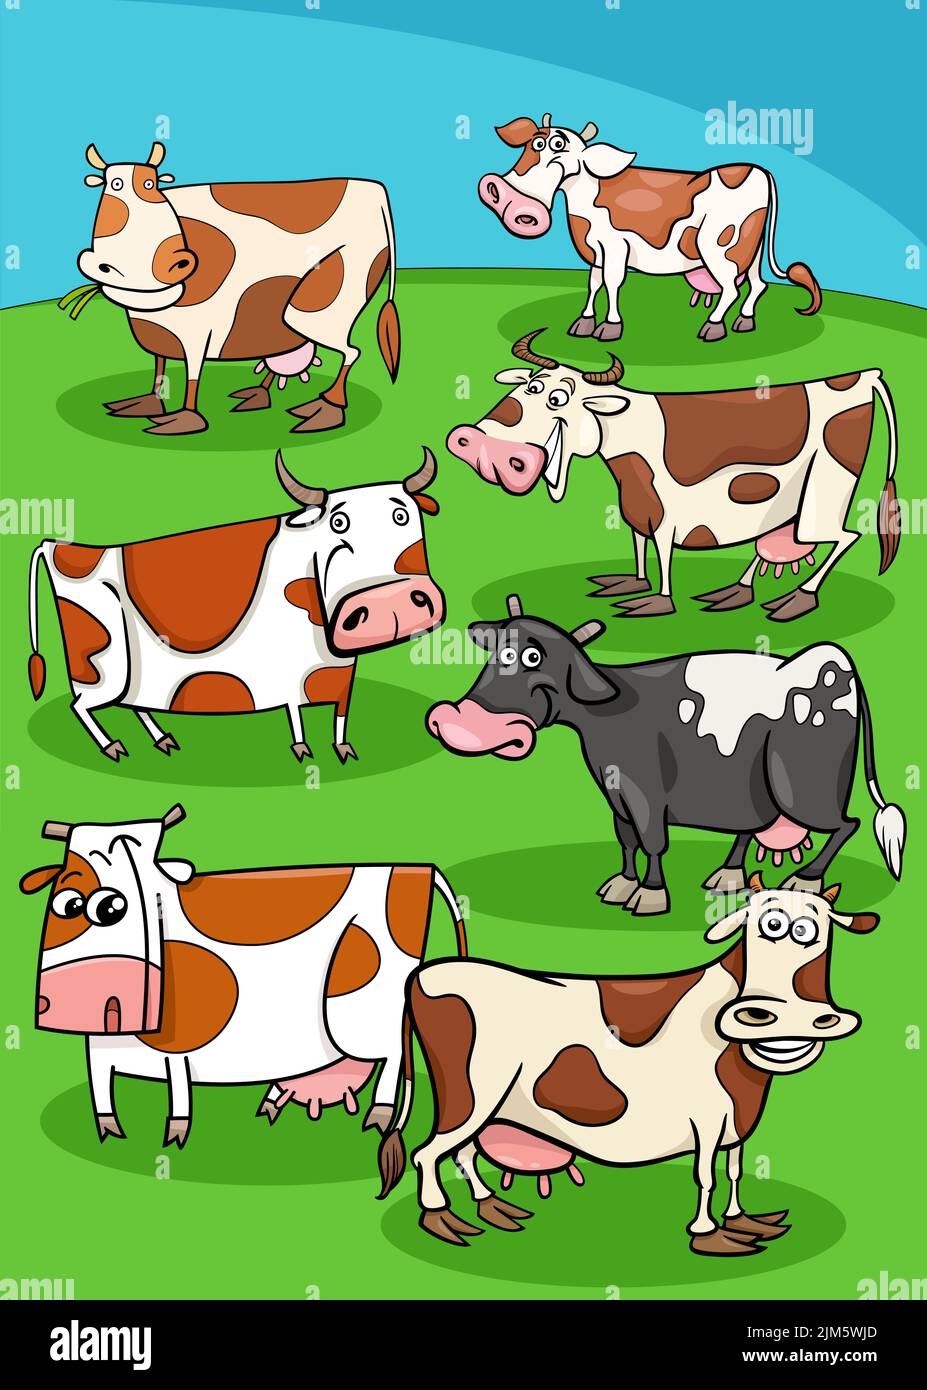 Cartoon illustration of cows farm animal characters in the meadow Stock Vector